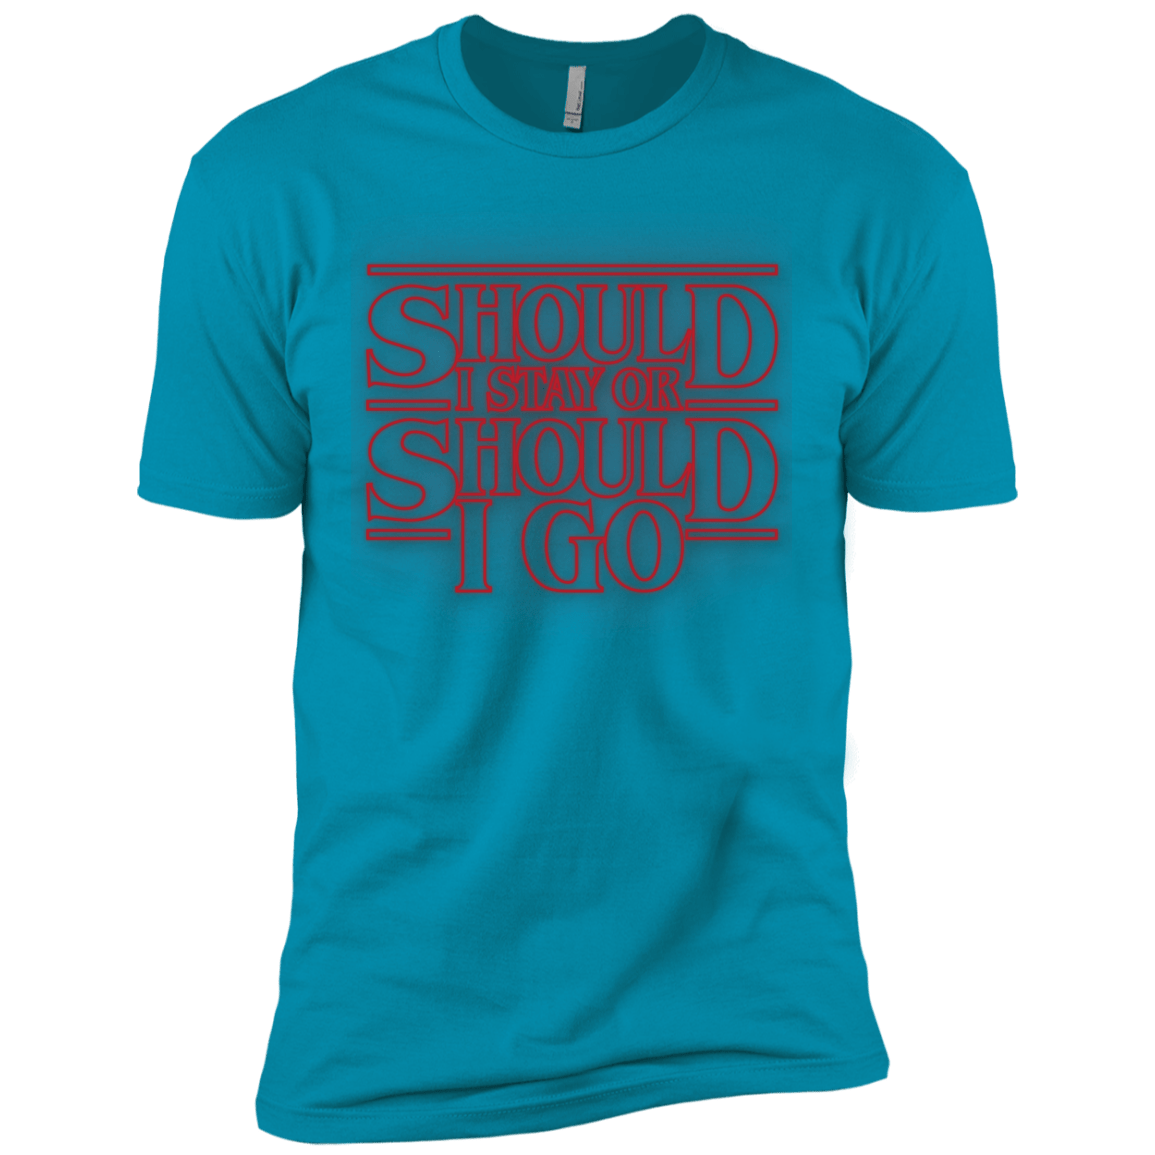 T-Shirts Turquoise / X-Small Should I Stay Or Should I Go Men's Premium T-Shirt